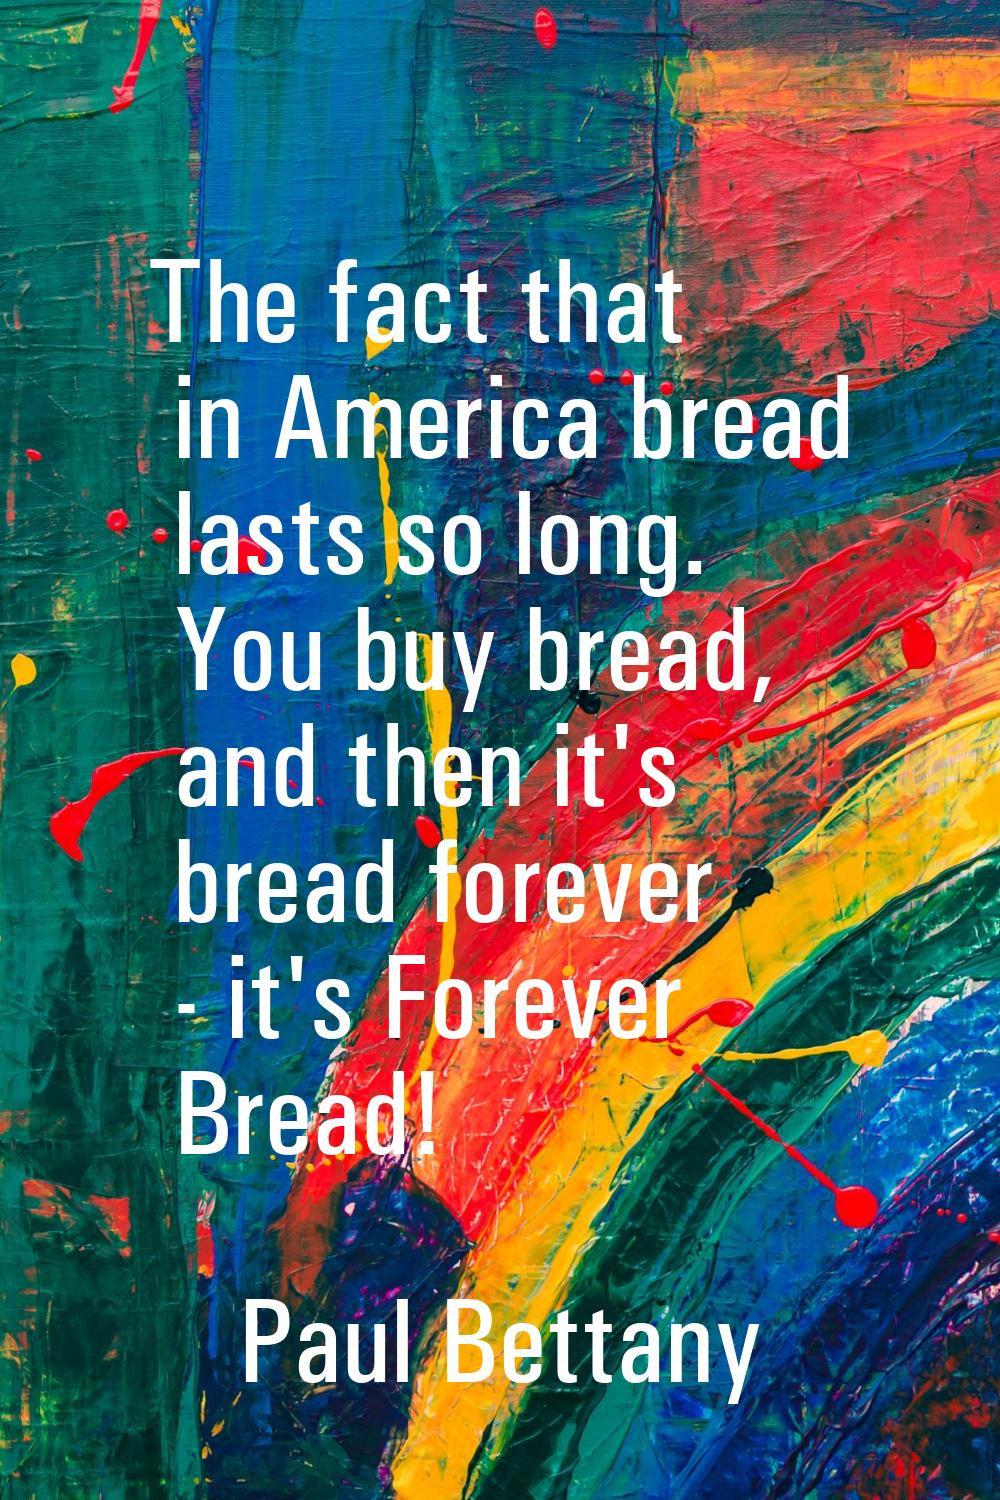 The fact that in America bread lasts so long. You buy bread, and then it's bread forever - it's For